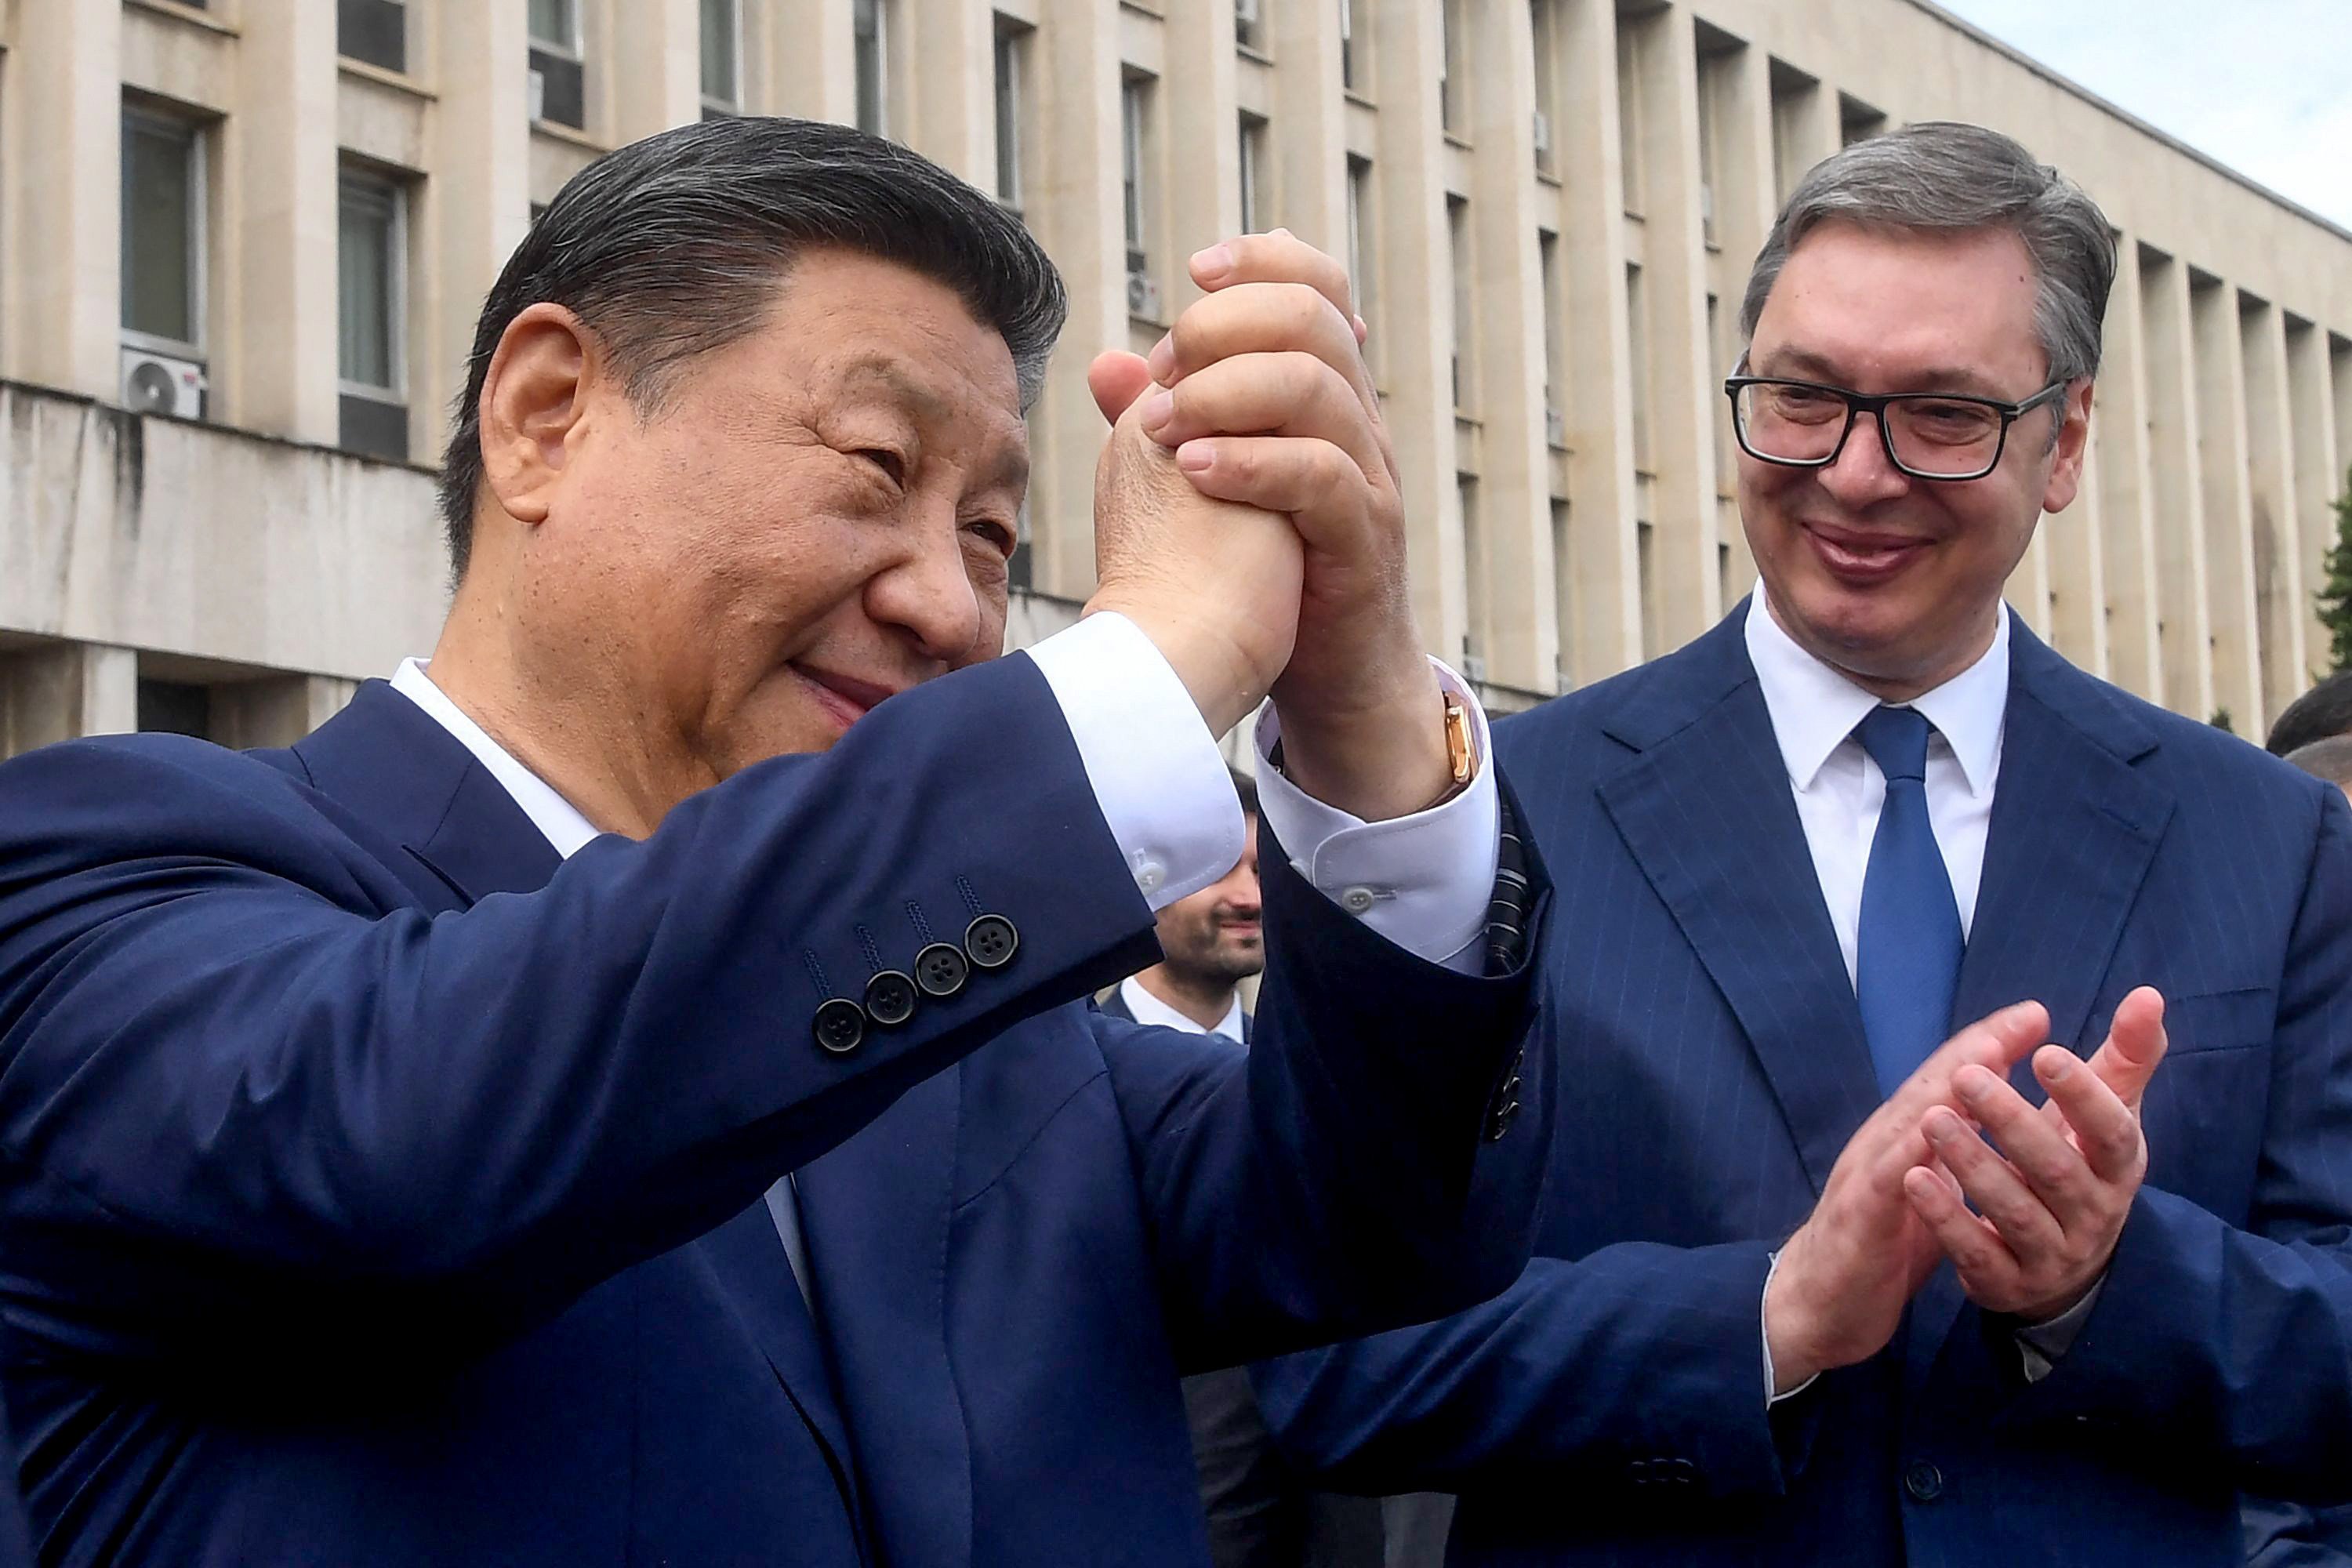 Chinese President Xi Jinping, accompanied by Serbian President Aleksandar Vucic, greets people gathered outside the Palace of Serbia during a welcome ceremony in Belgrade on Wedneday. Photo: Serbia’s Presidential press service / AFP